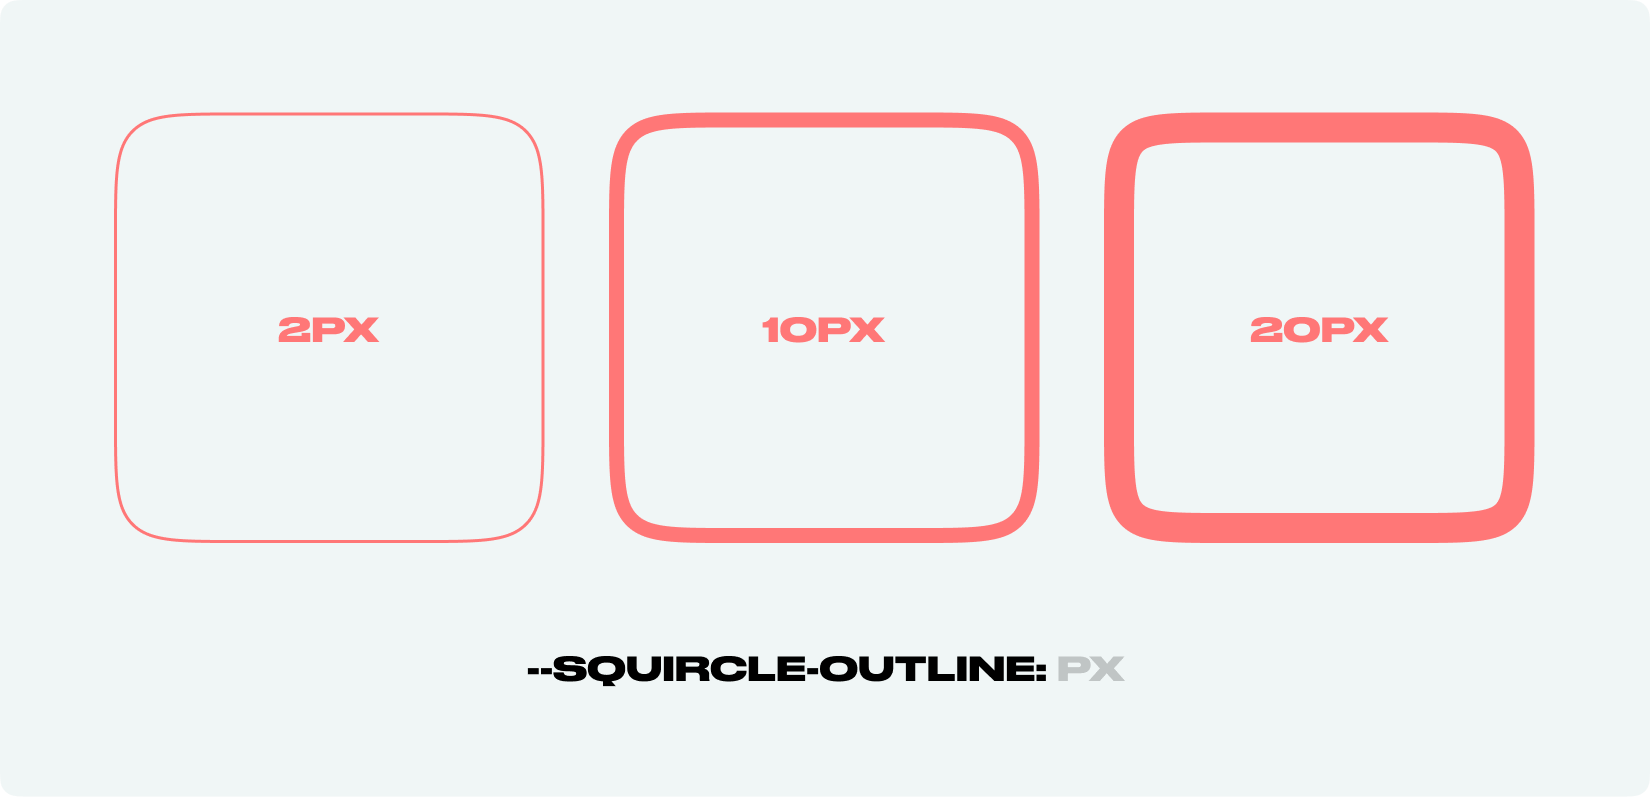 --squircle-outline